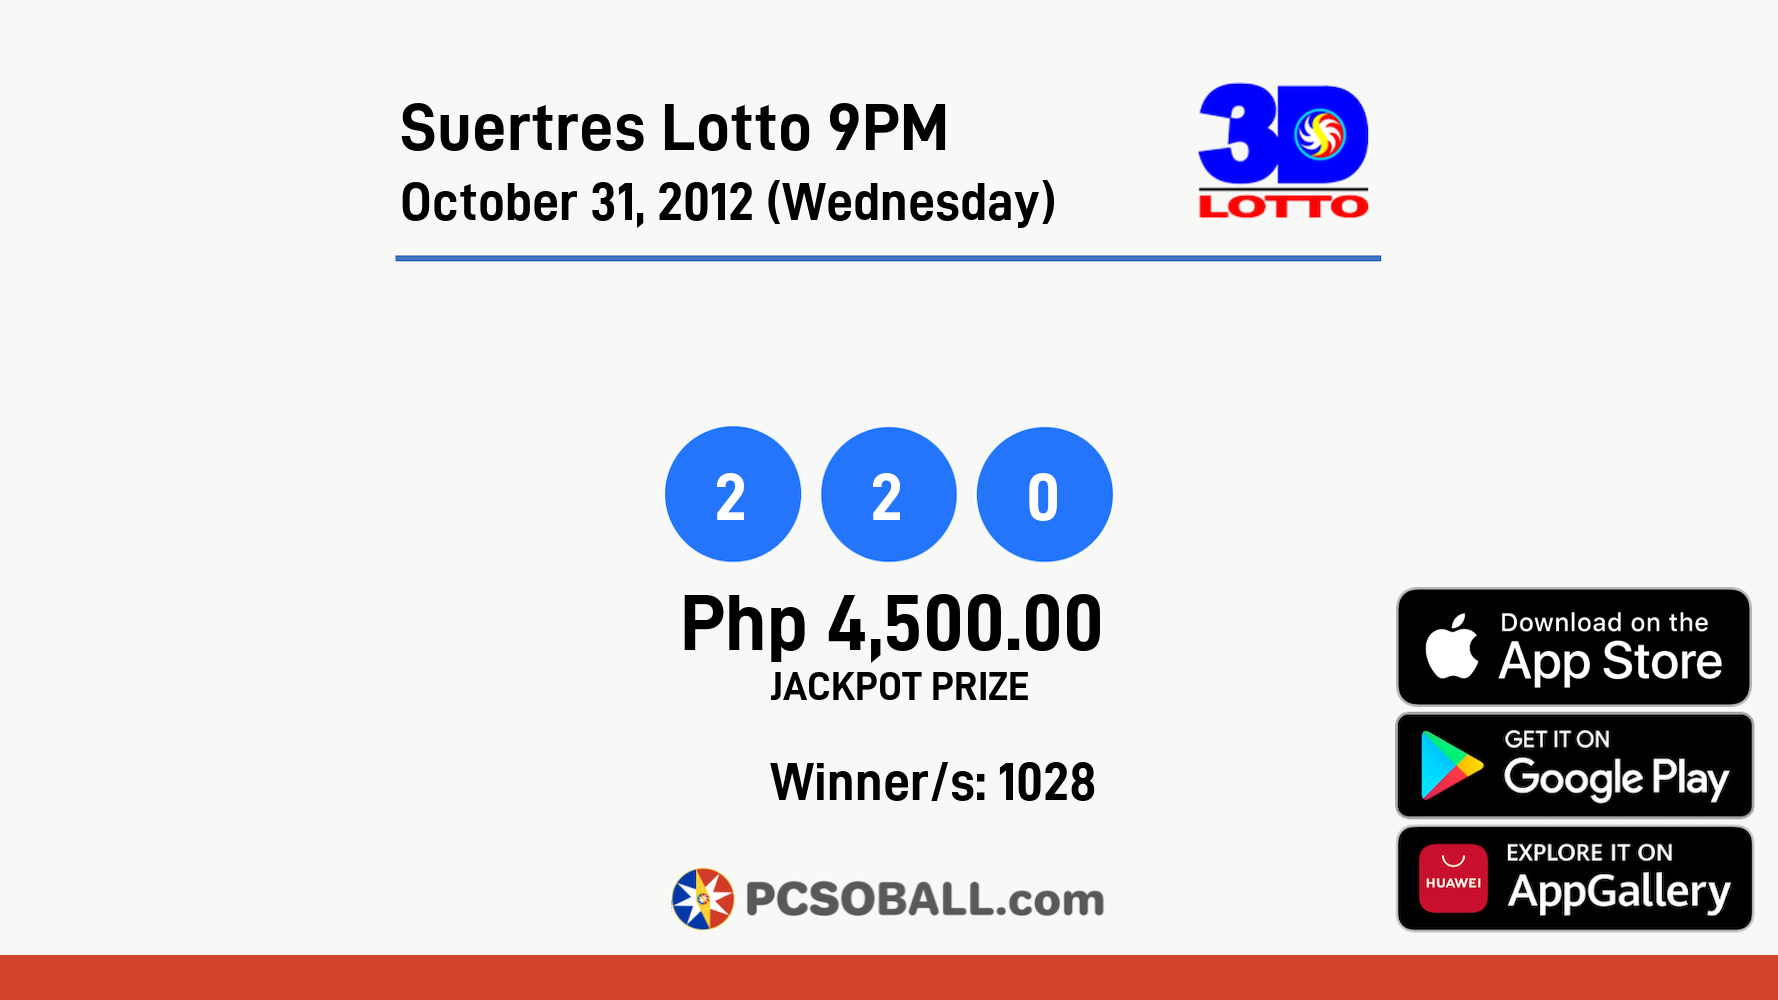 Suertres Lotto 9PM October 31, 2012 (Wednesday) Result